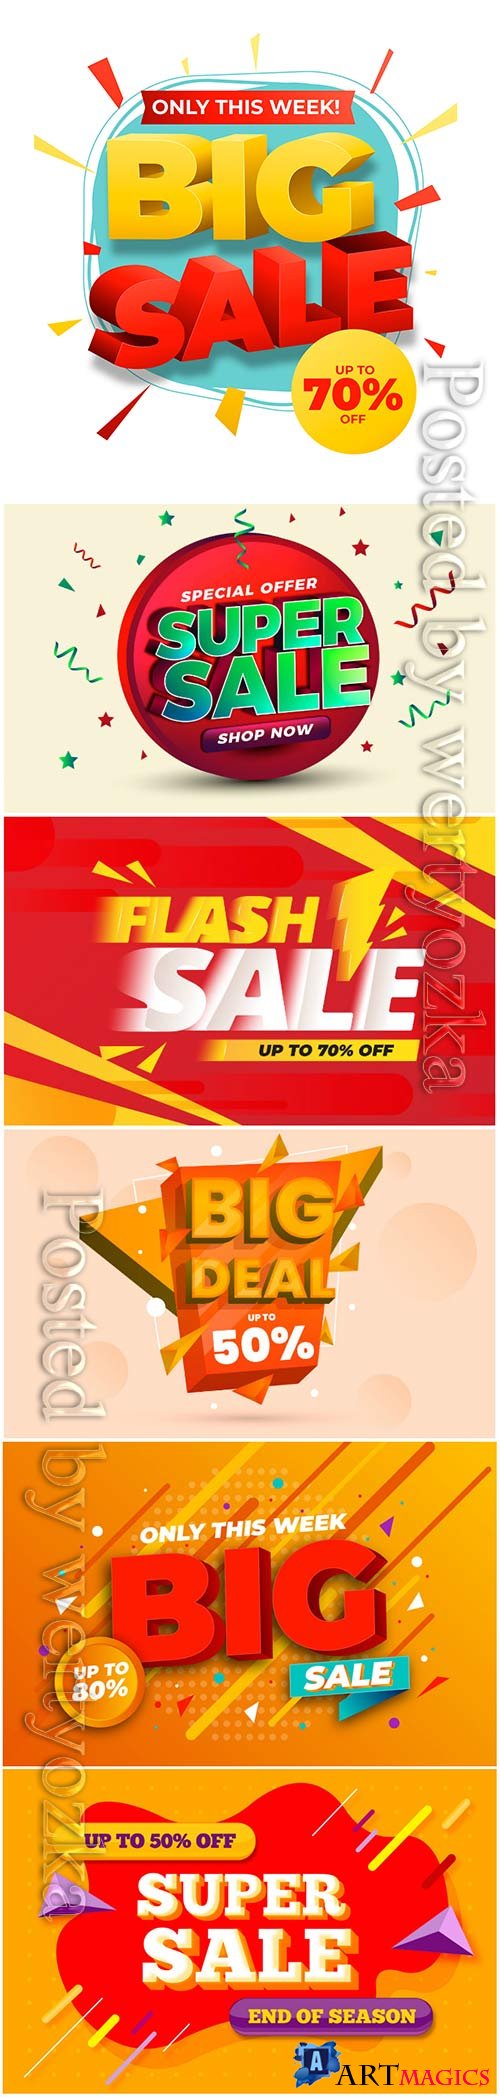 Colorful 3d sales vector background # 4